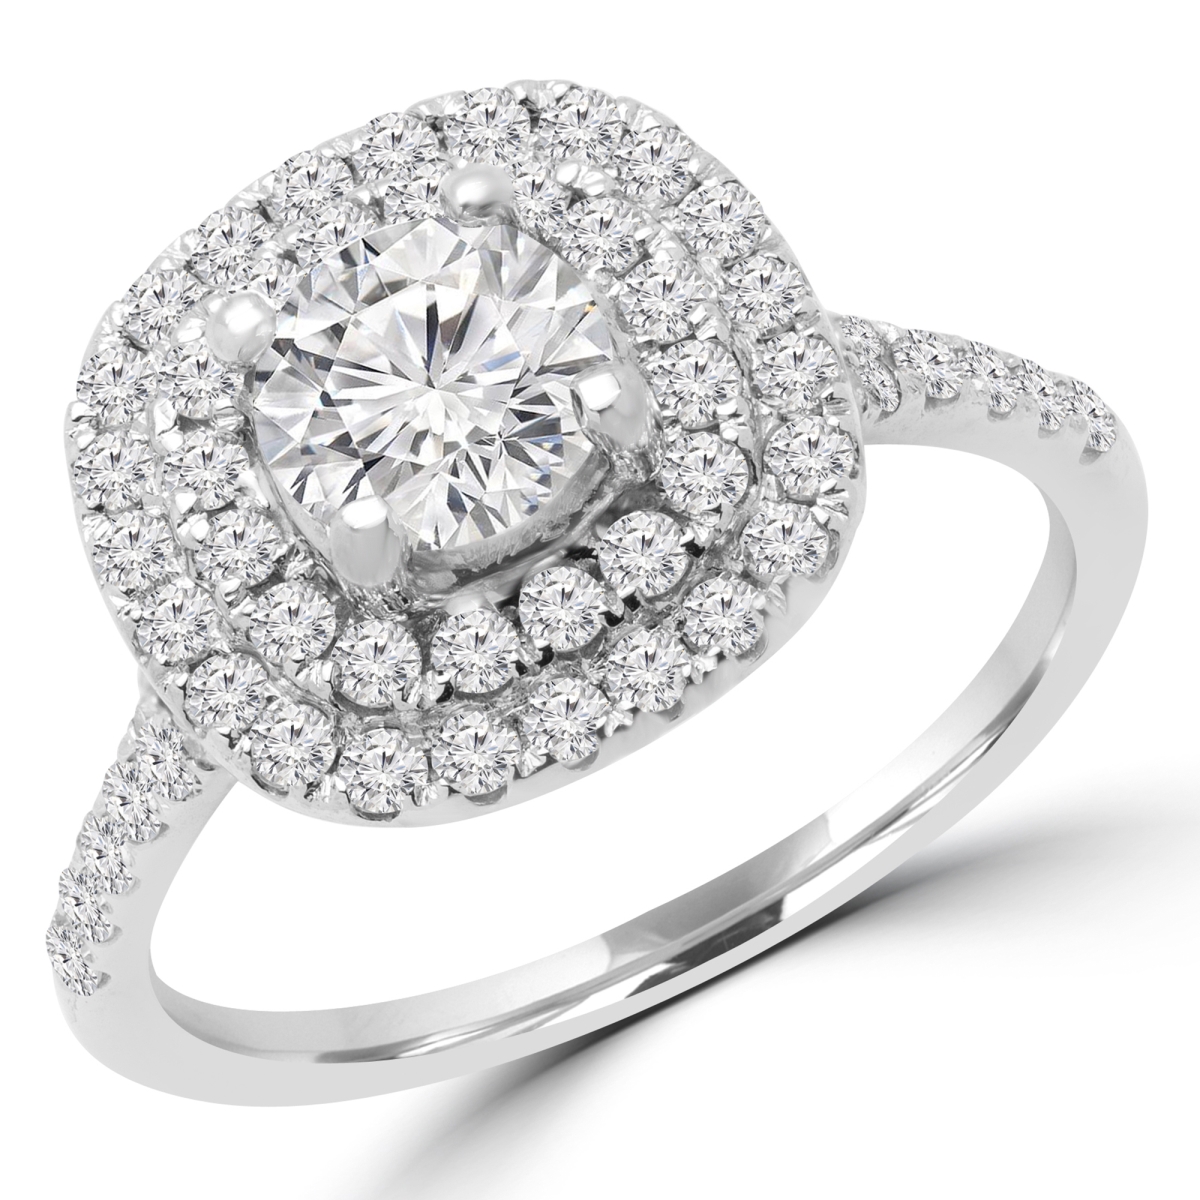 Picture of Majesty Diamonds MD170293-8.5 1.4 CTW Round Diamond Double Halo Engagement Ring in 14K White Gold - Size 8.5